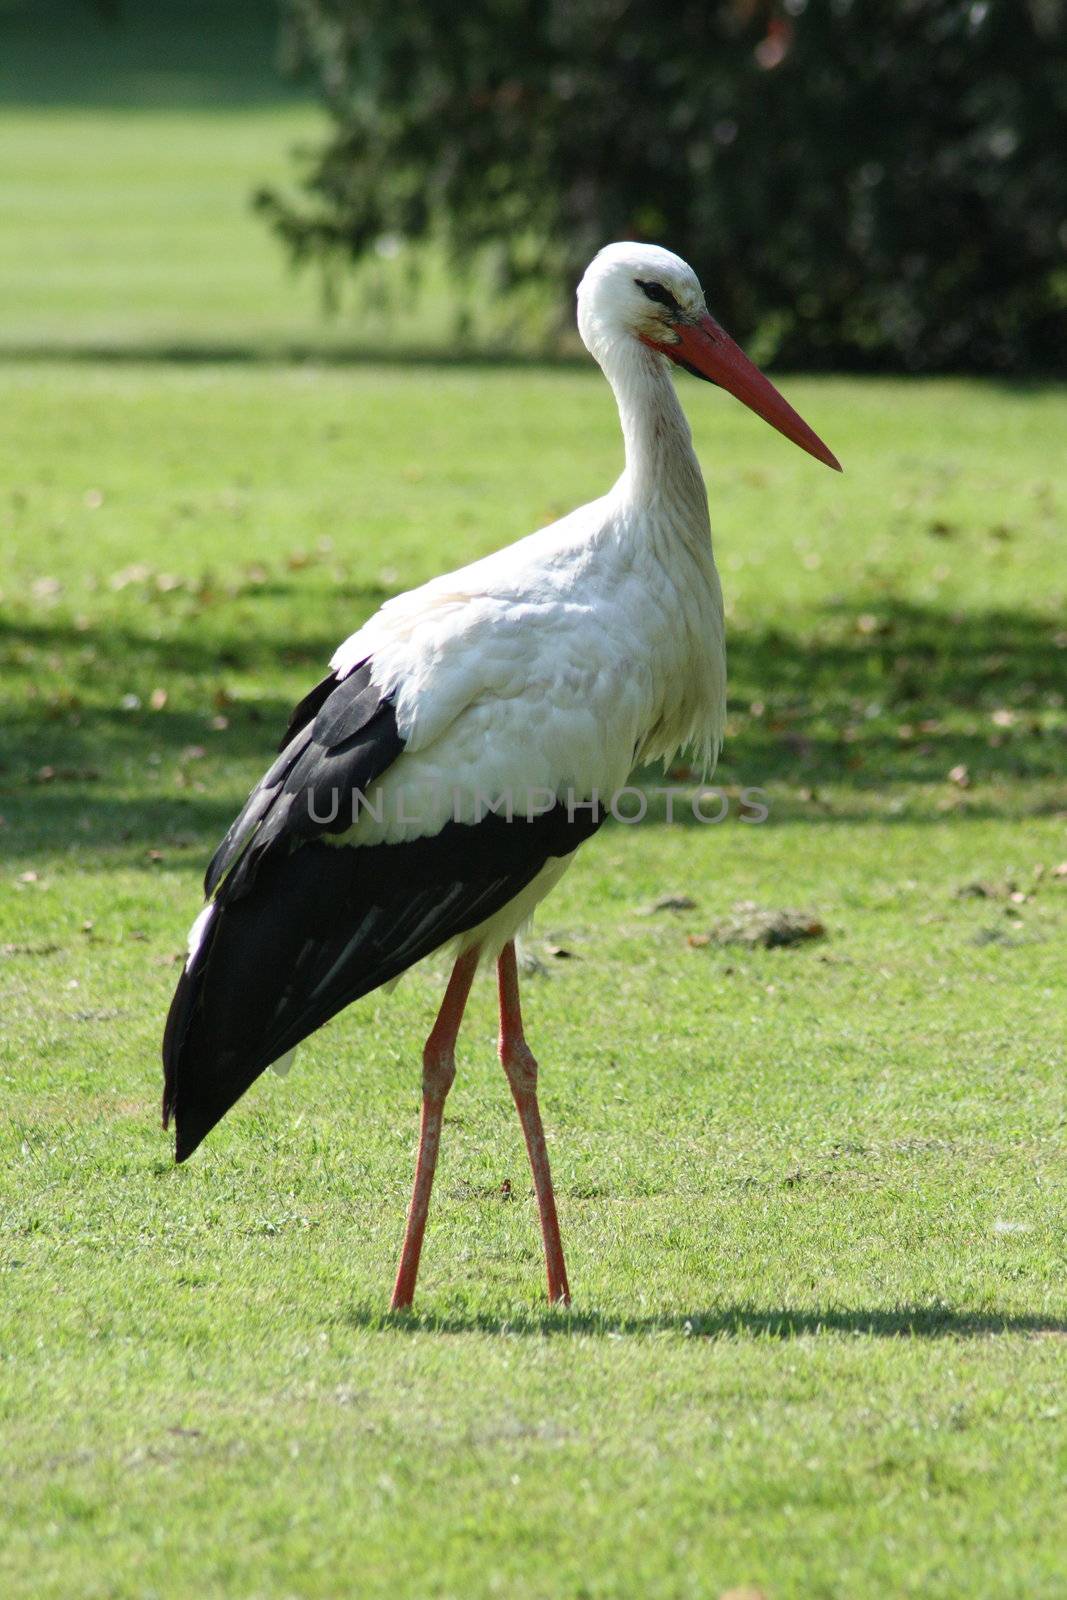 Weißstorch White Stork ,"Ciconia ciconia" by hadot